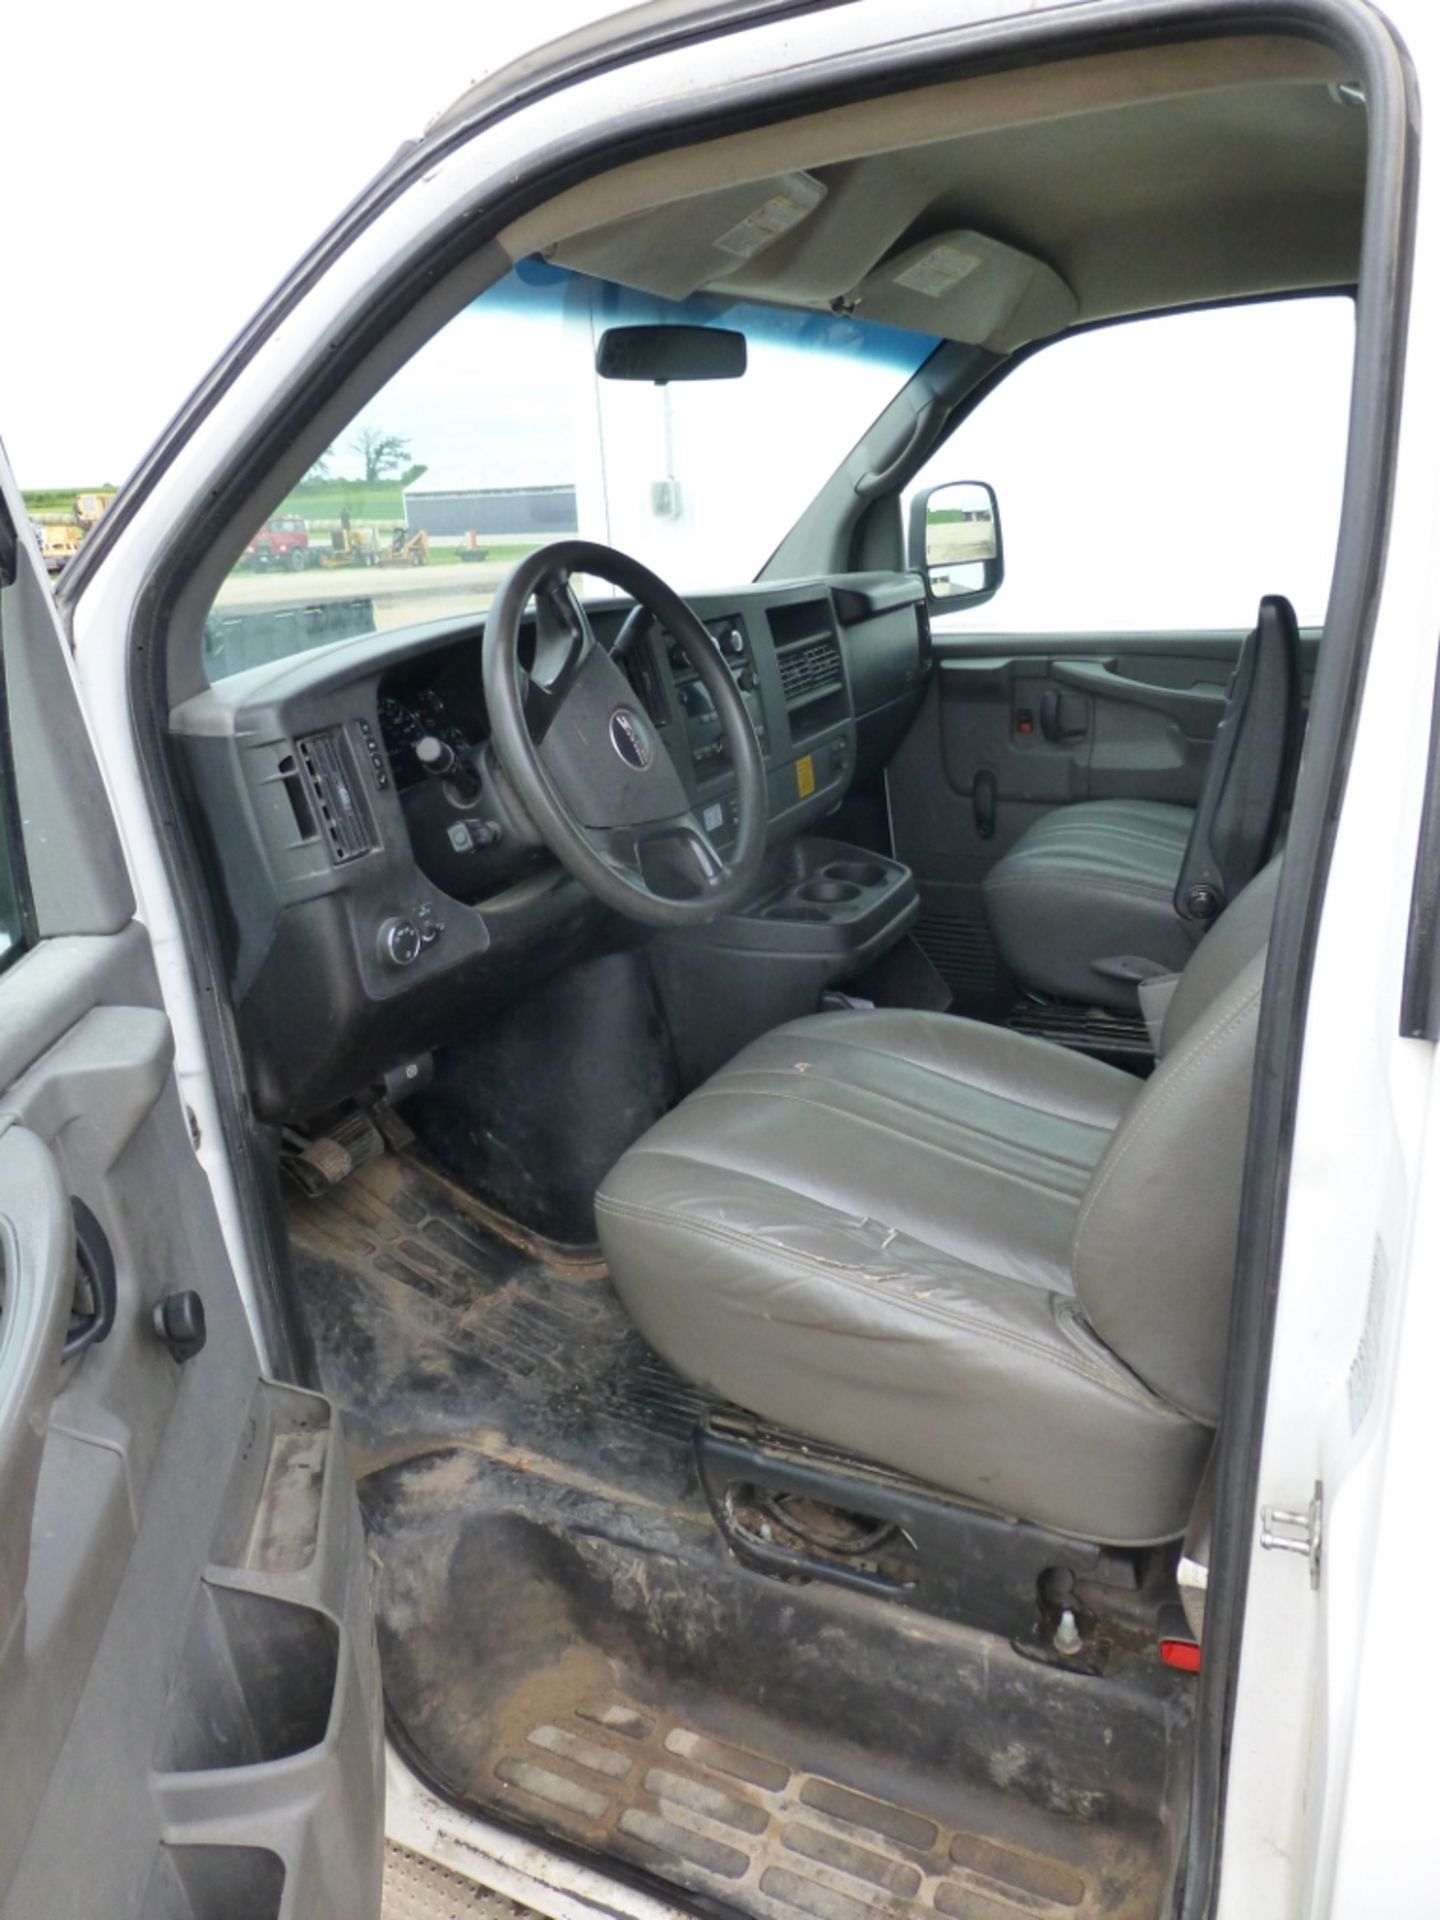 2008 GMC Cargo van, with shelf drawer units, automatic, a.c., manual windows, 254,605 unverified - Image 9 of 22